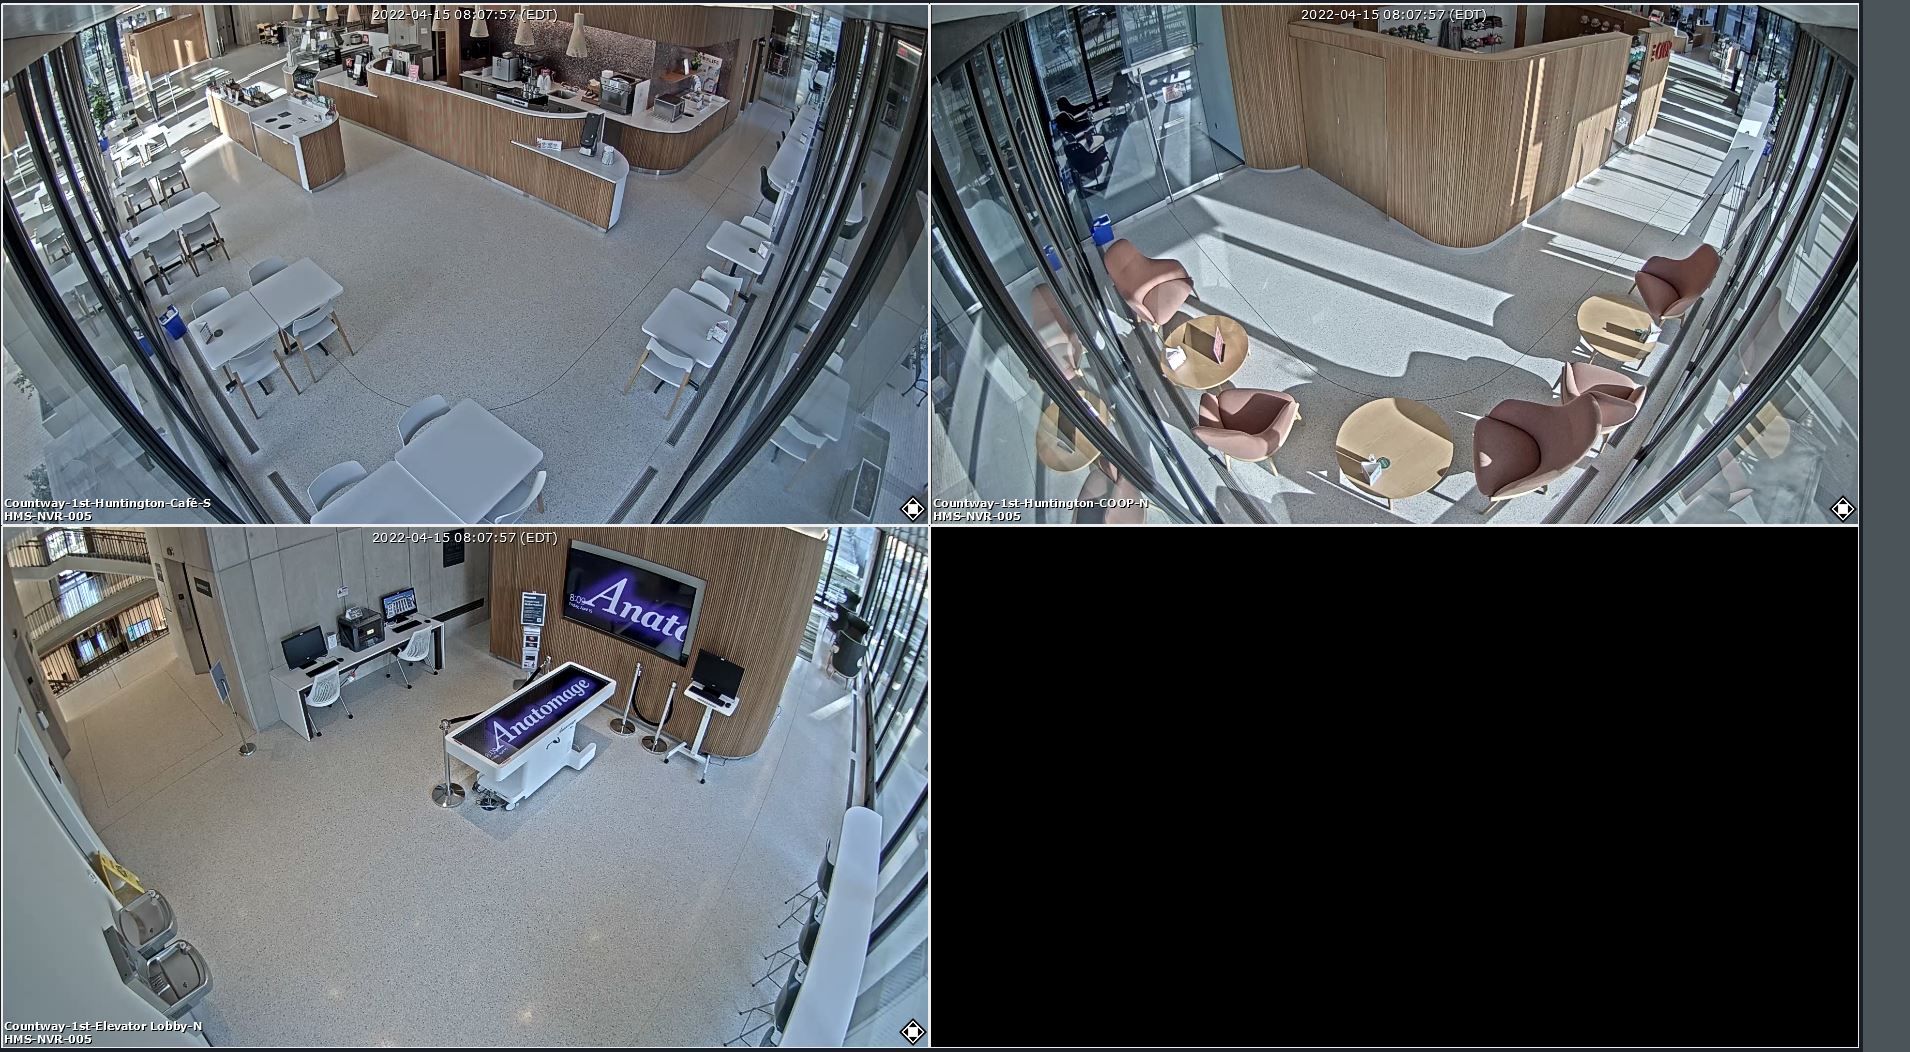 camera footage of 1st floor cafe and coop area